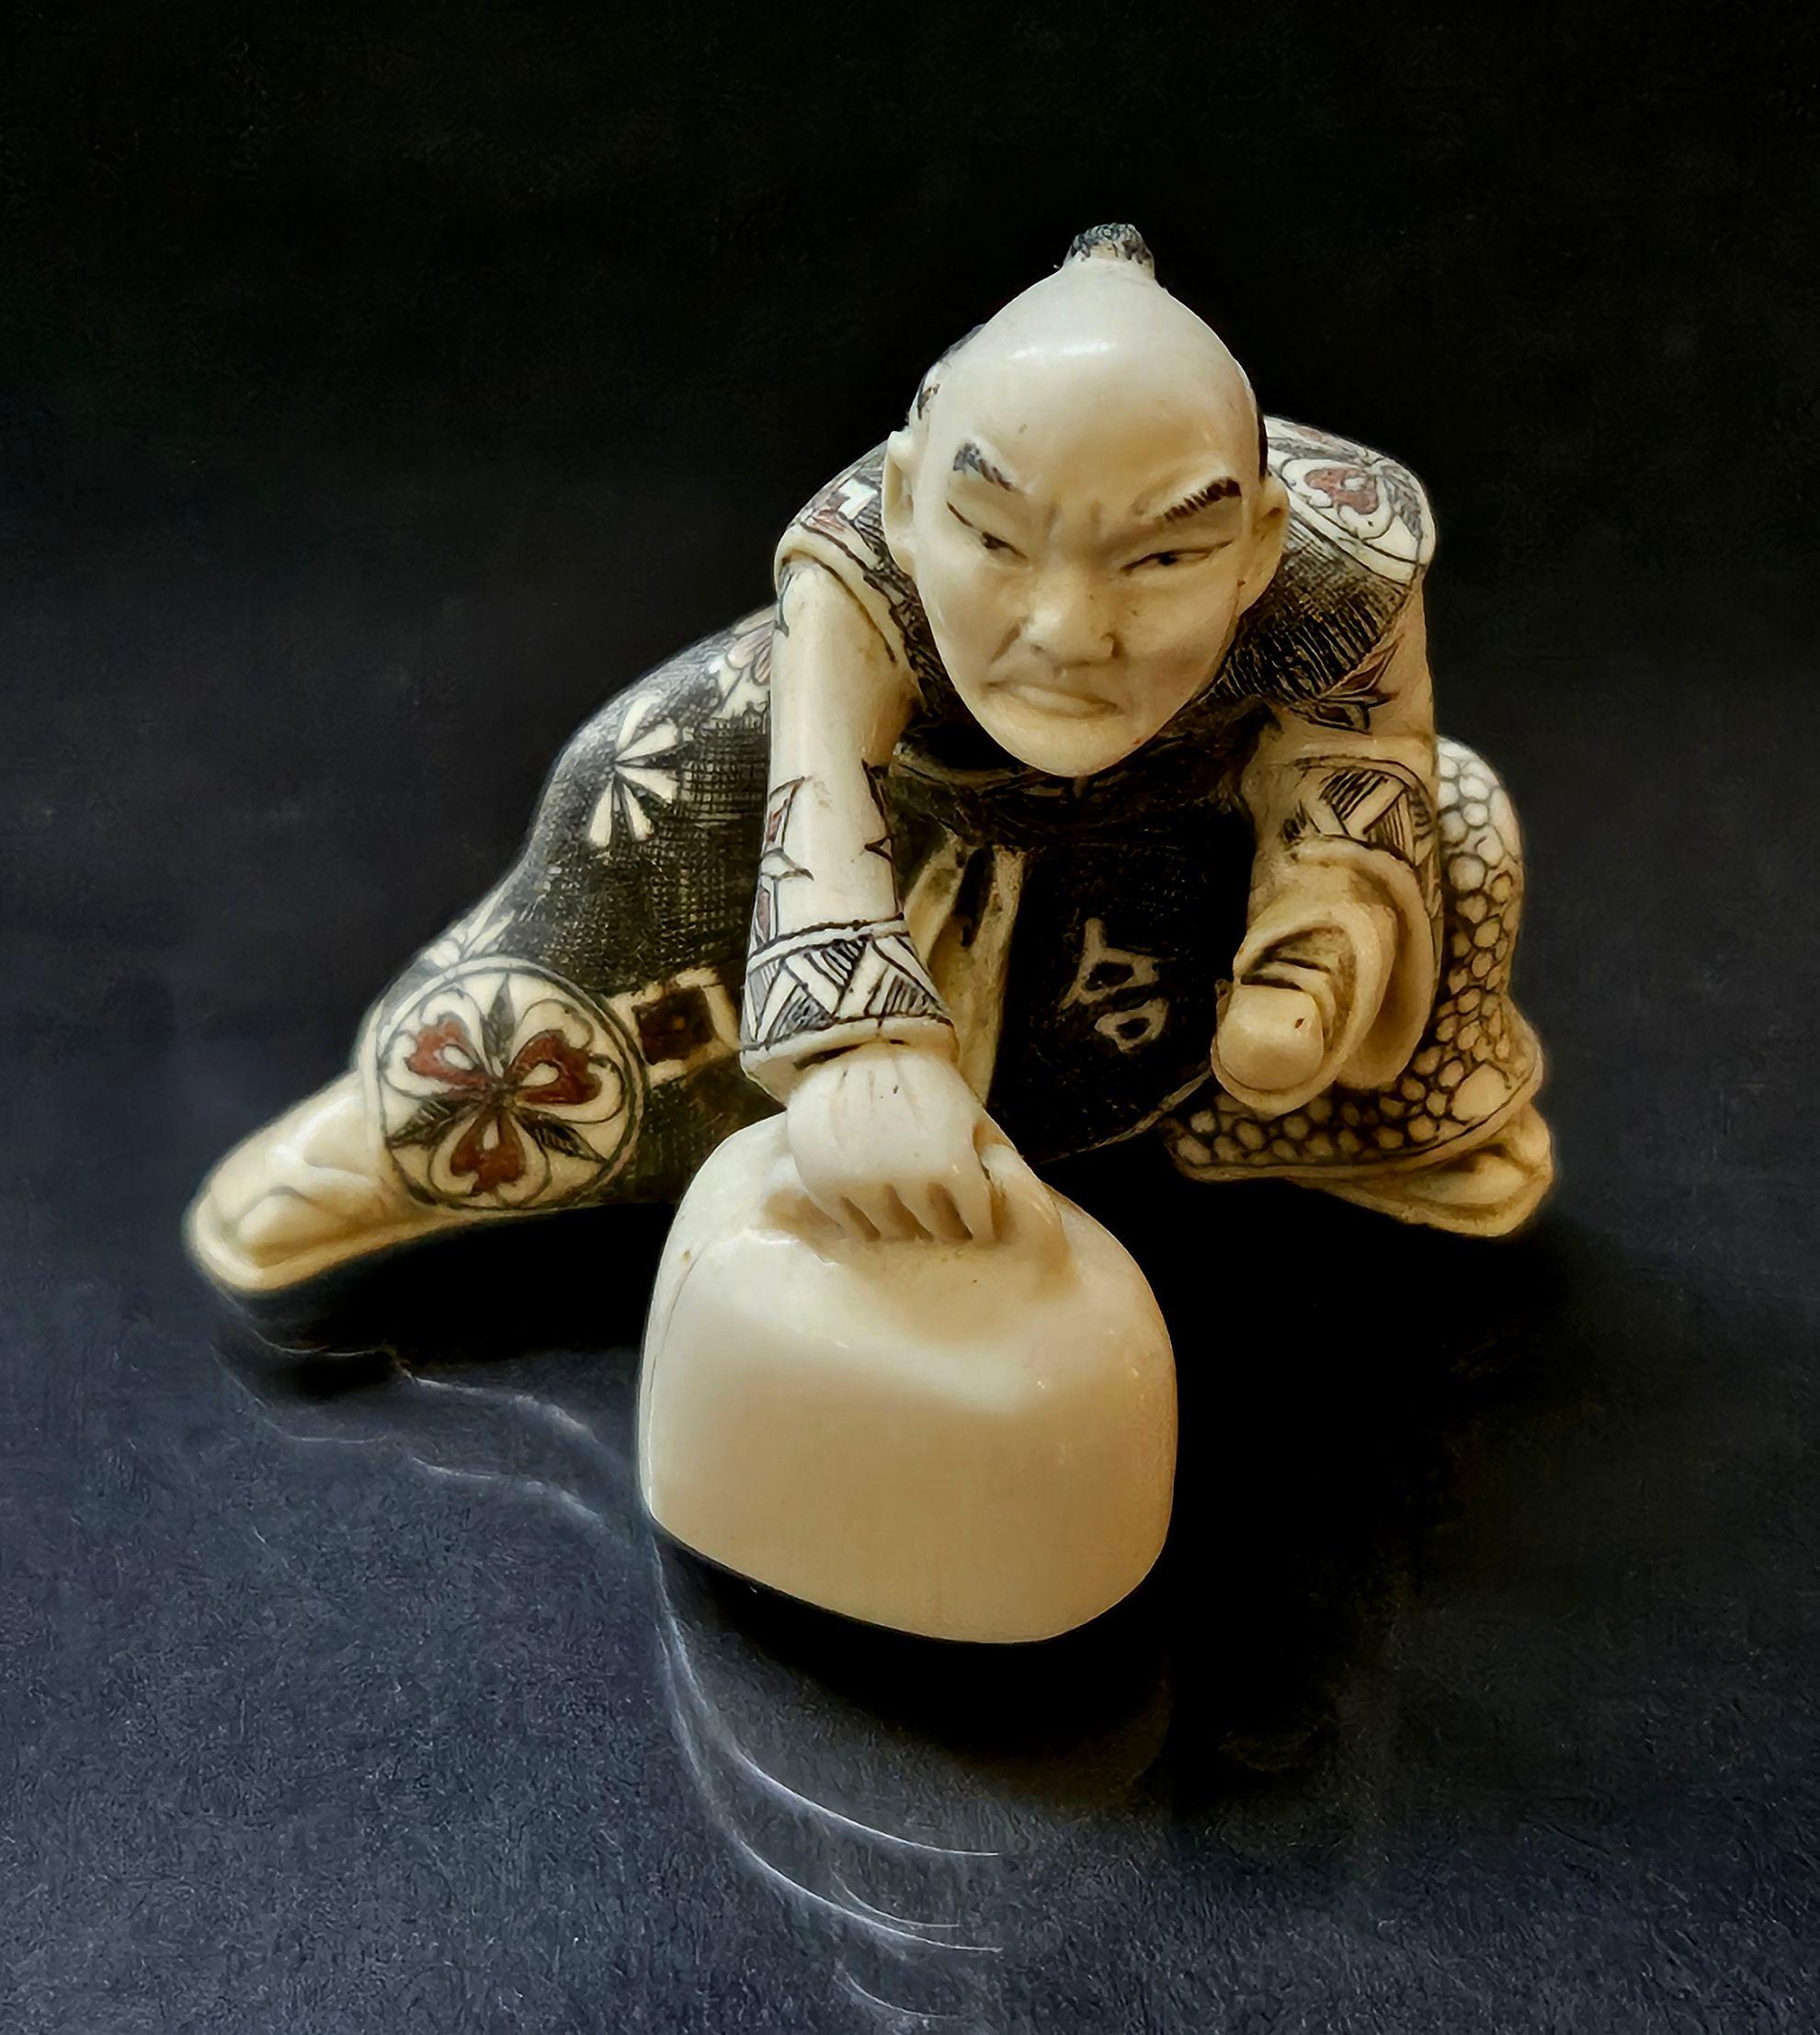 Netsuke Japanese Hand-Carved Polychrome Decorated Figure, Signed by Gyokushi (玉芝), Edo Period. 

A truly hand-carved ivory figure, A man is lifting a weight. It looks like he is challenging himself for his strength, which shows a museum